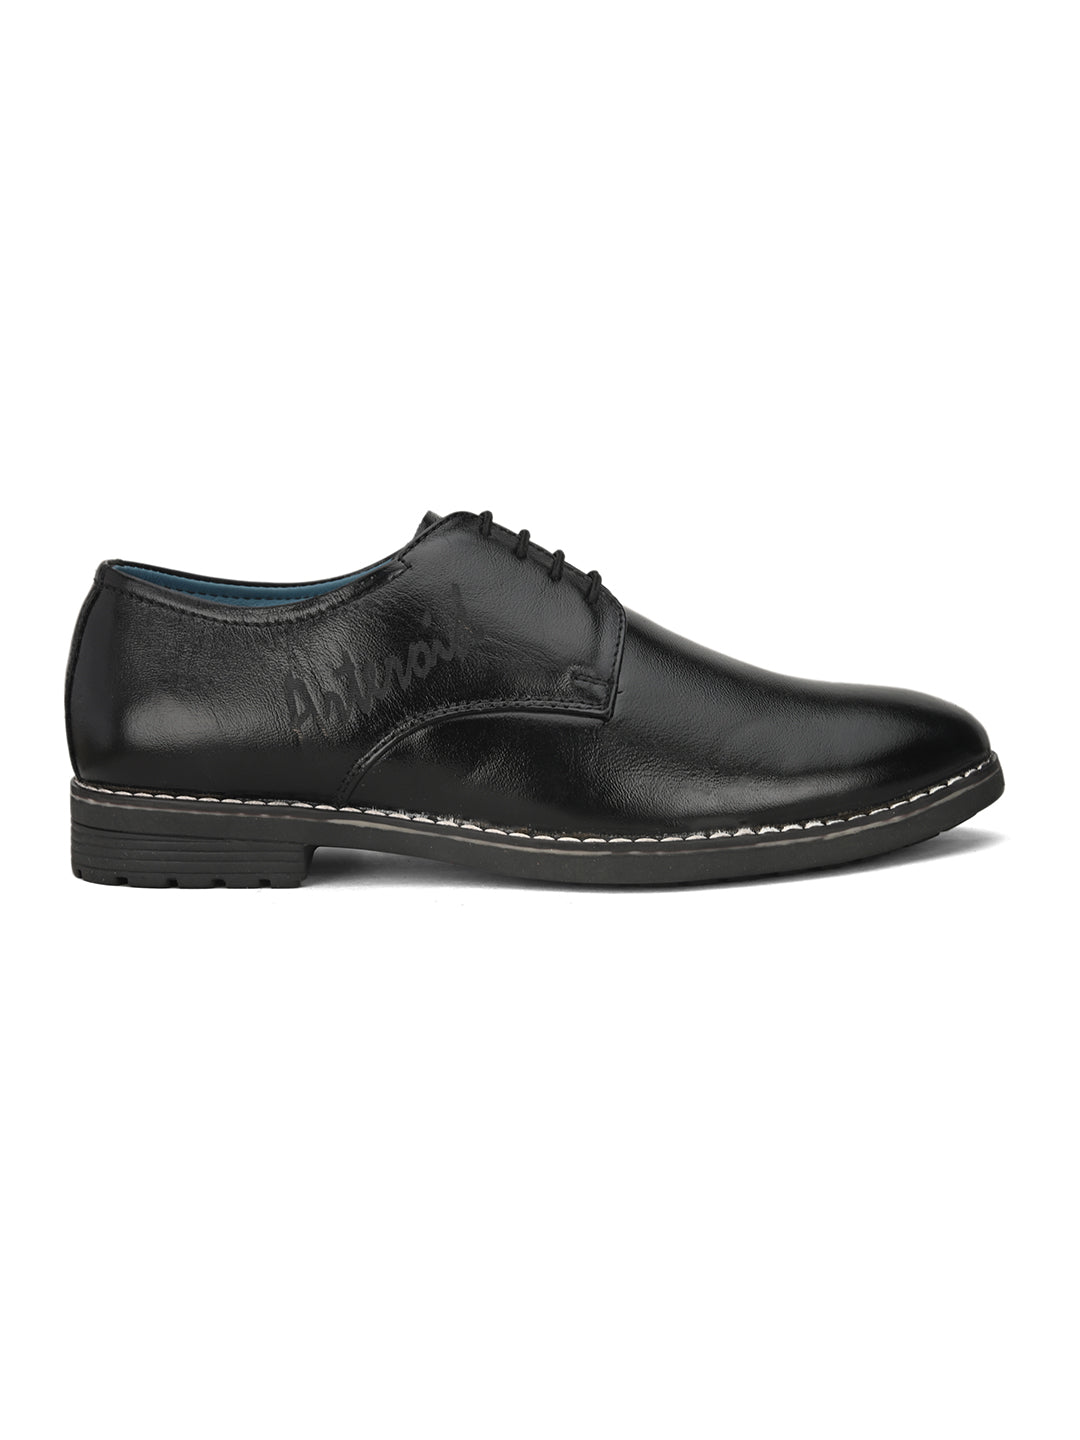 ASTEROID Genuine Leather Derby Formal Shoes.